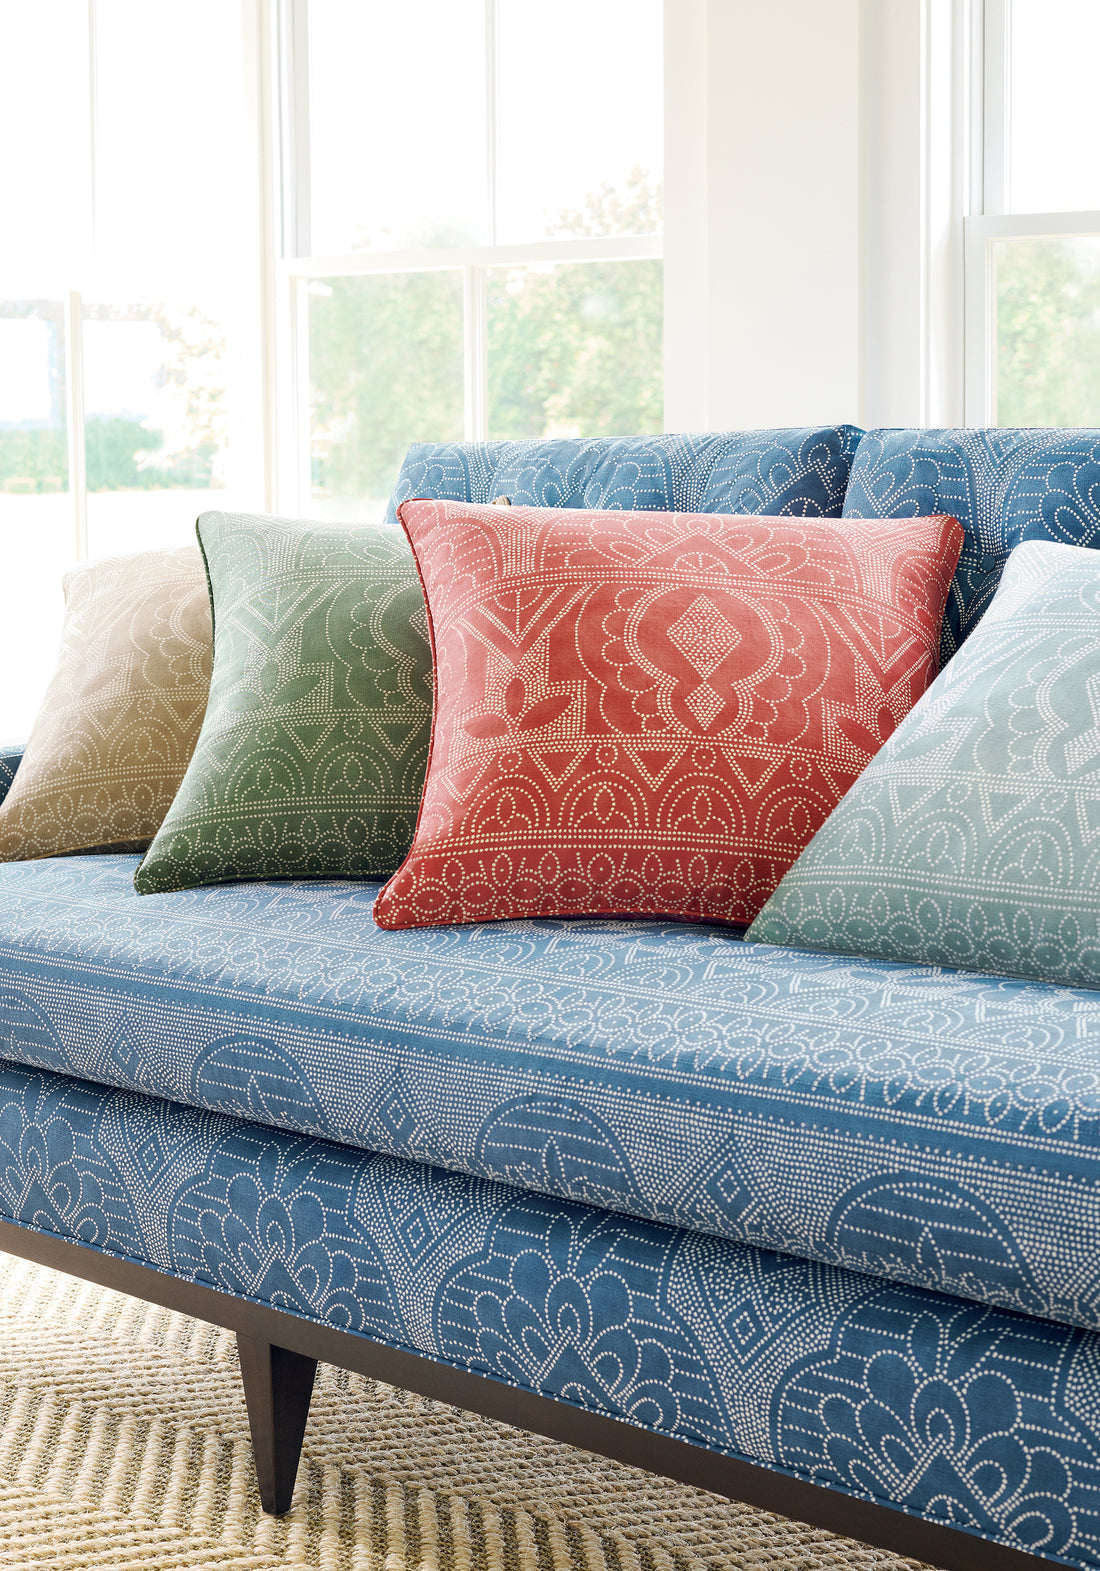 Pillow in Medinas fabric in sunbaked color - pattern number F981304 - by Thibaut in the Montecito collection